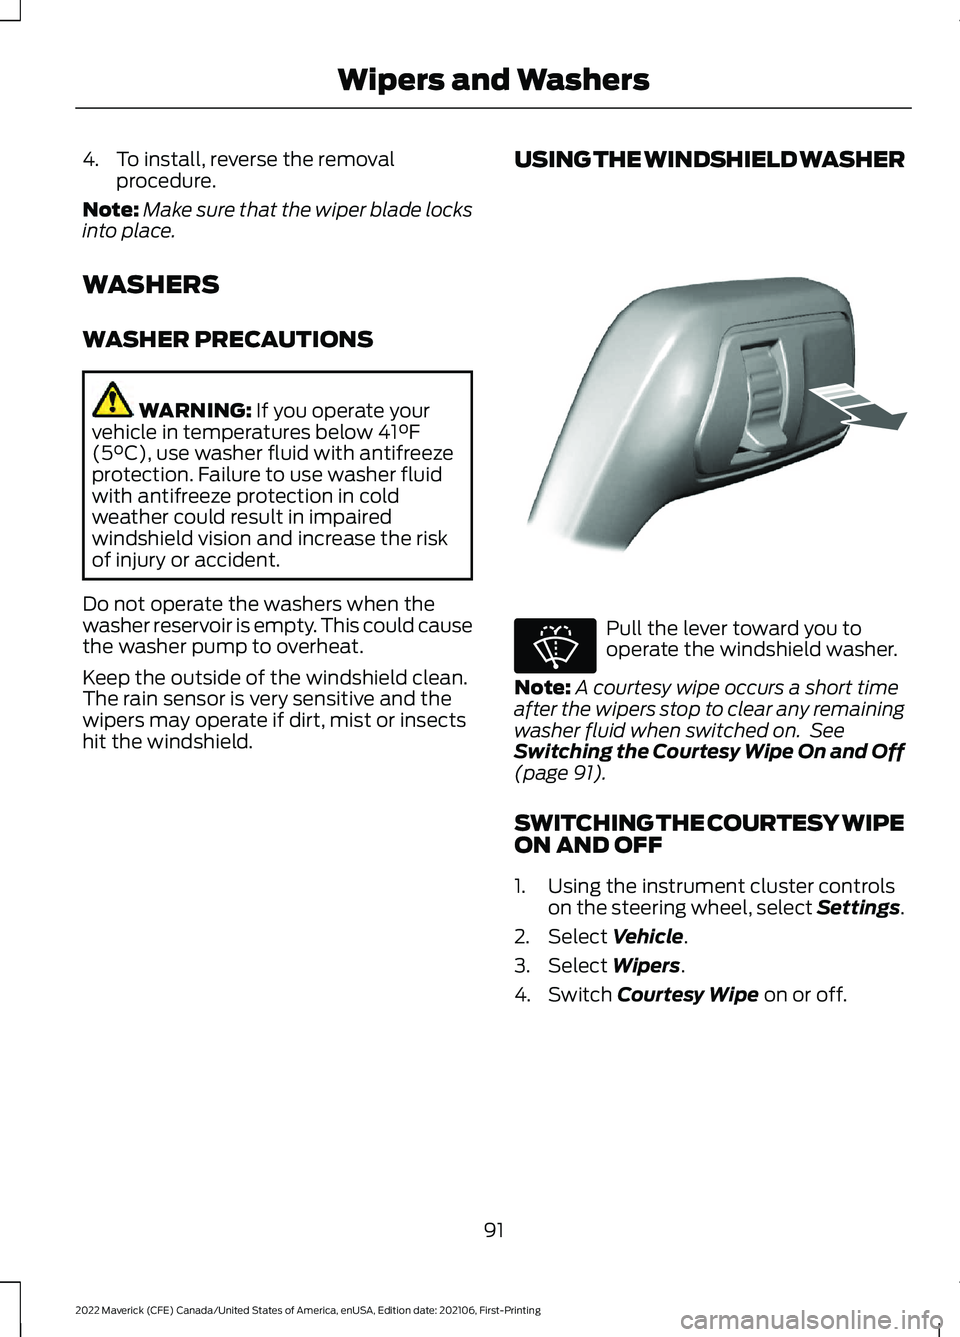 FORD MAVERICK 2022  Owners Manual 4. To install, reverse the removal
procedure.
Note: Make sure that the wiper blade locks
into place.
WASHERS
WASHER PRECAUTIONS WARNING: If you operate your
vehicle in temperatures below 41°F
(5°C),